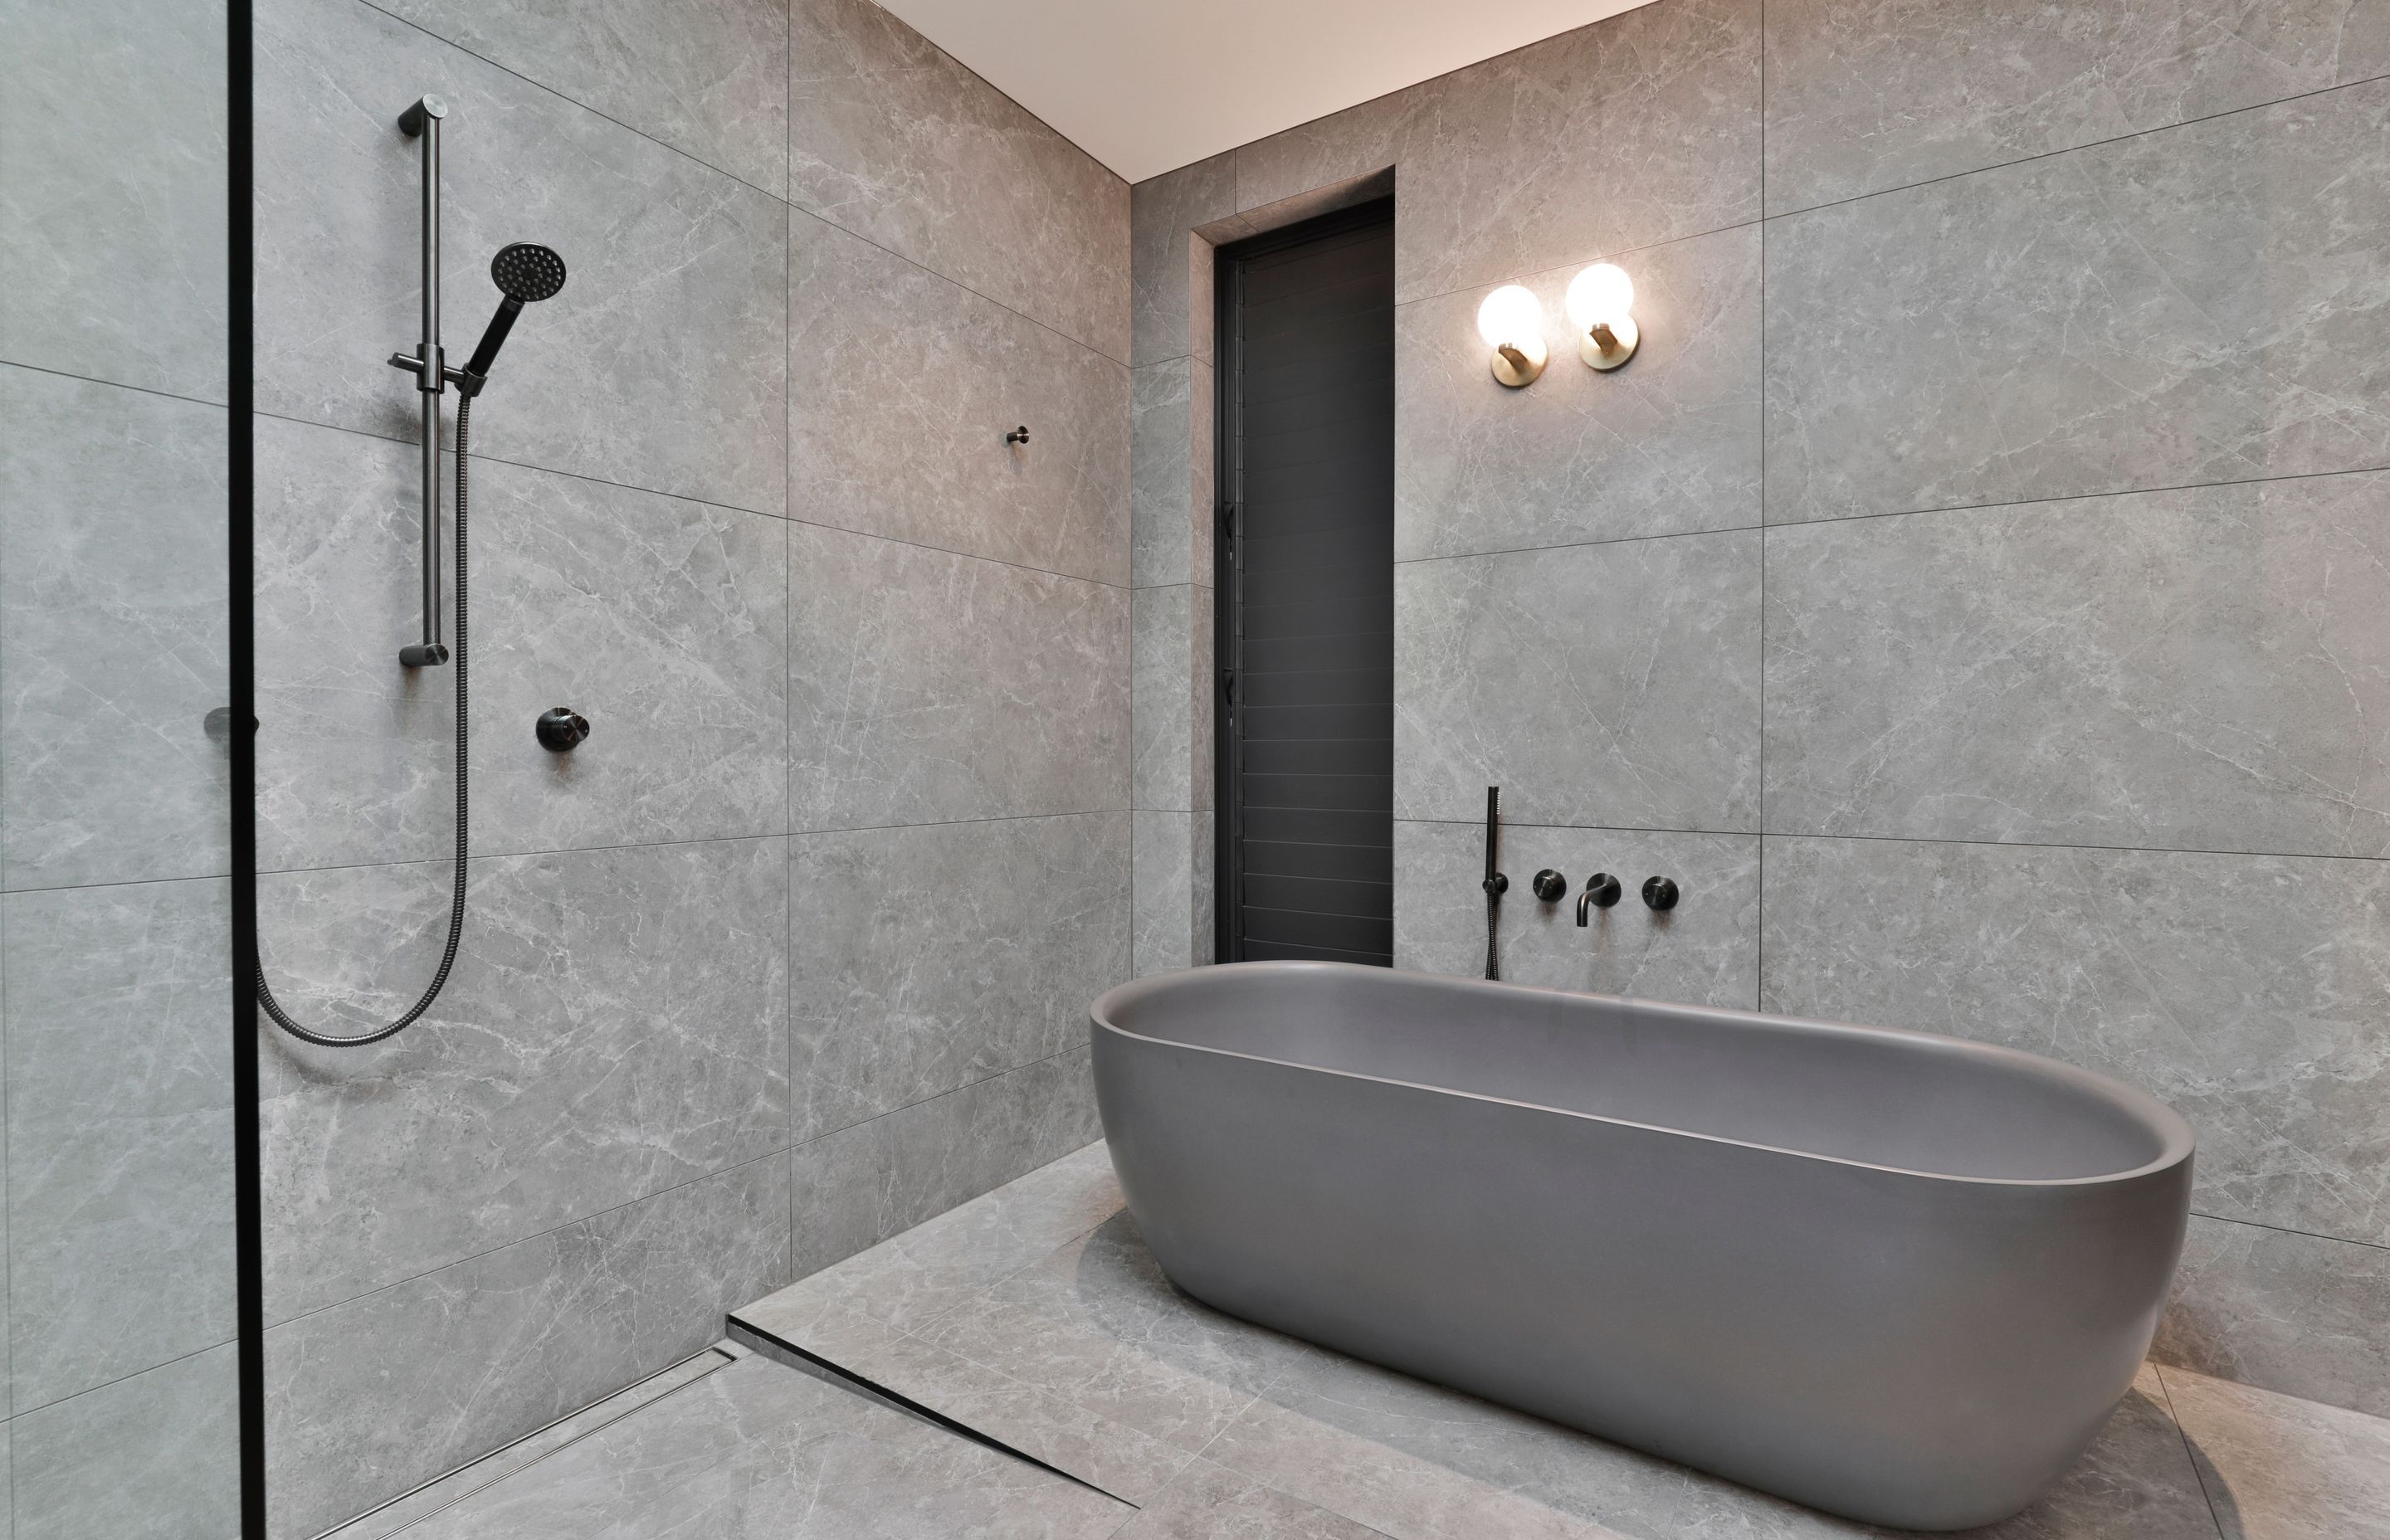 Design by Cube Dentro. Tile: Trilogy Sandy Grey Soft 600x1200mm. Stocked in 595x595mm